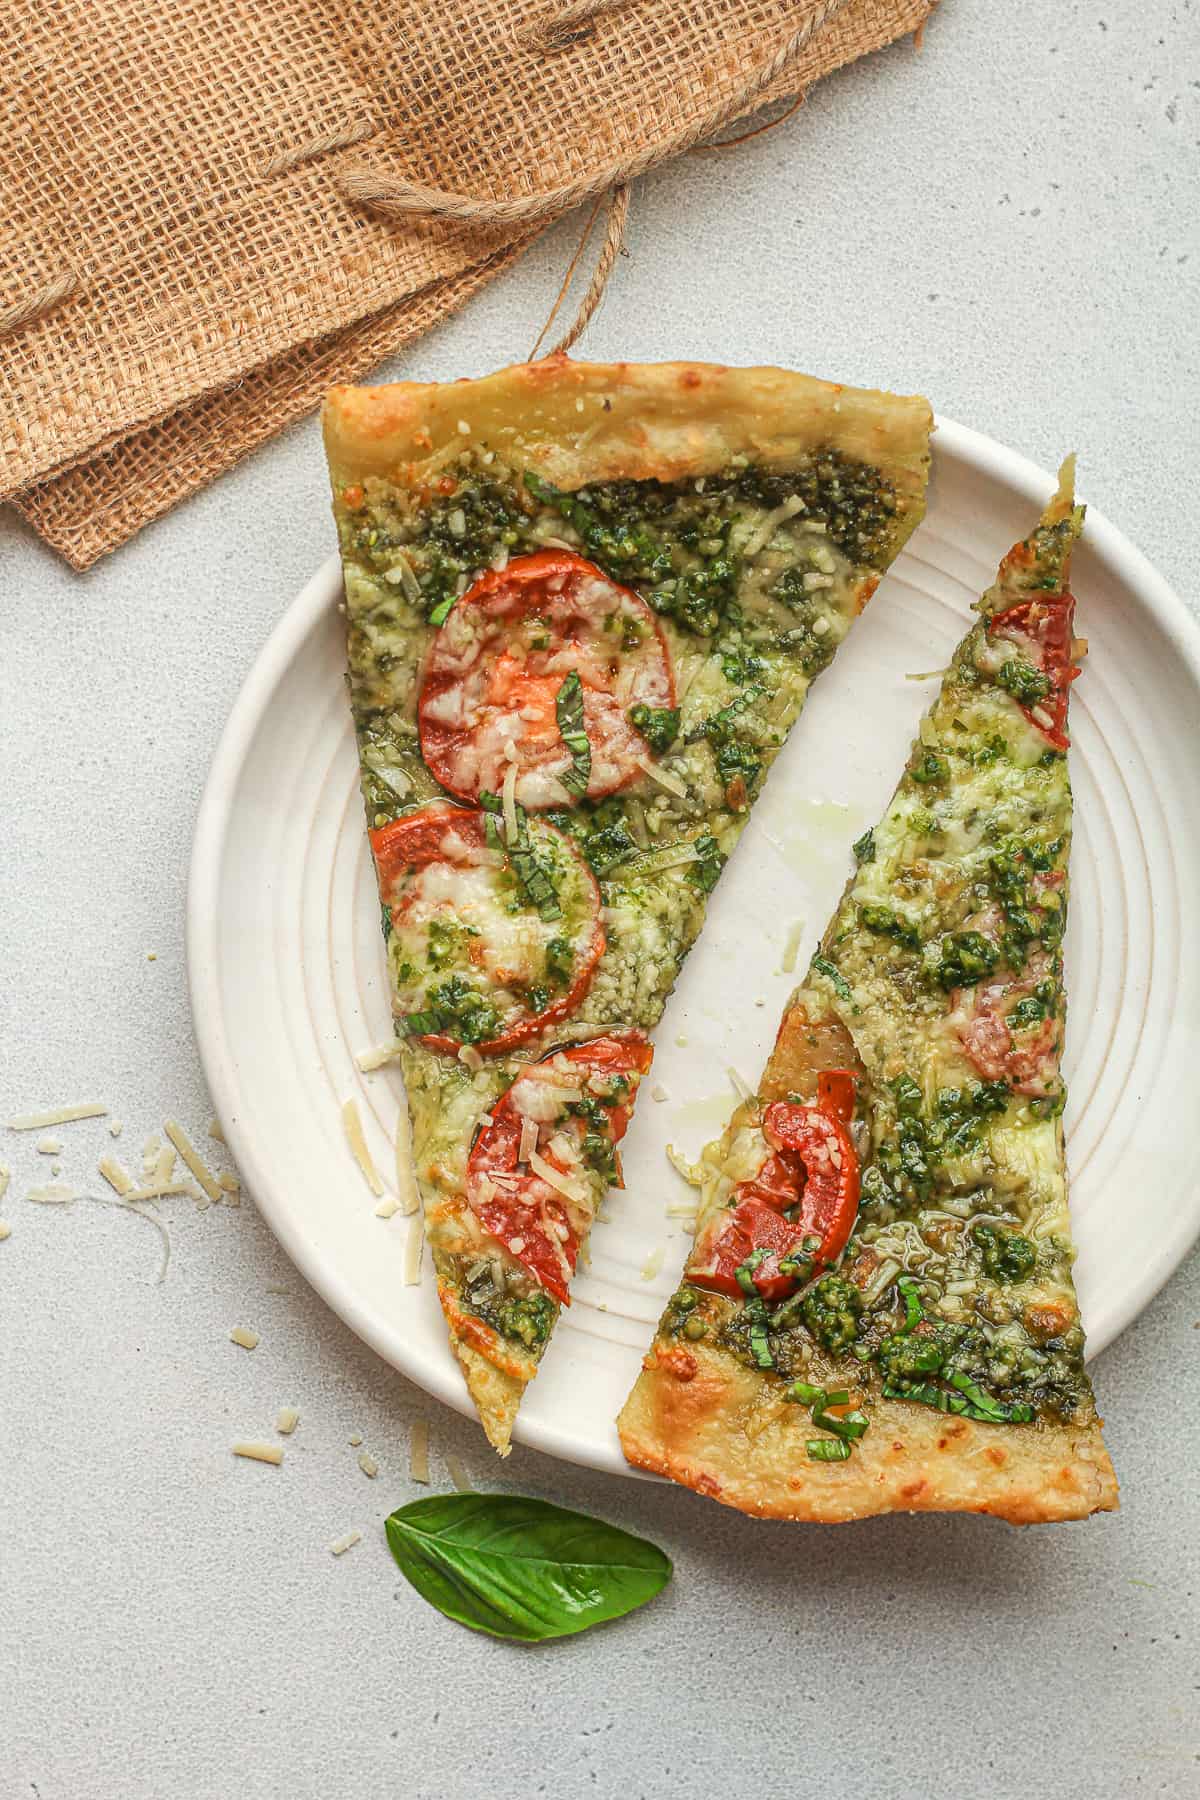 A plate of two wedges of pesto flatbread pizza.